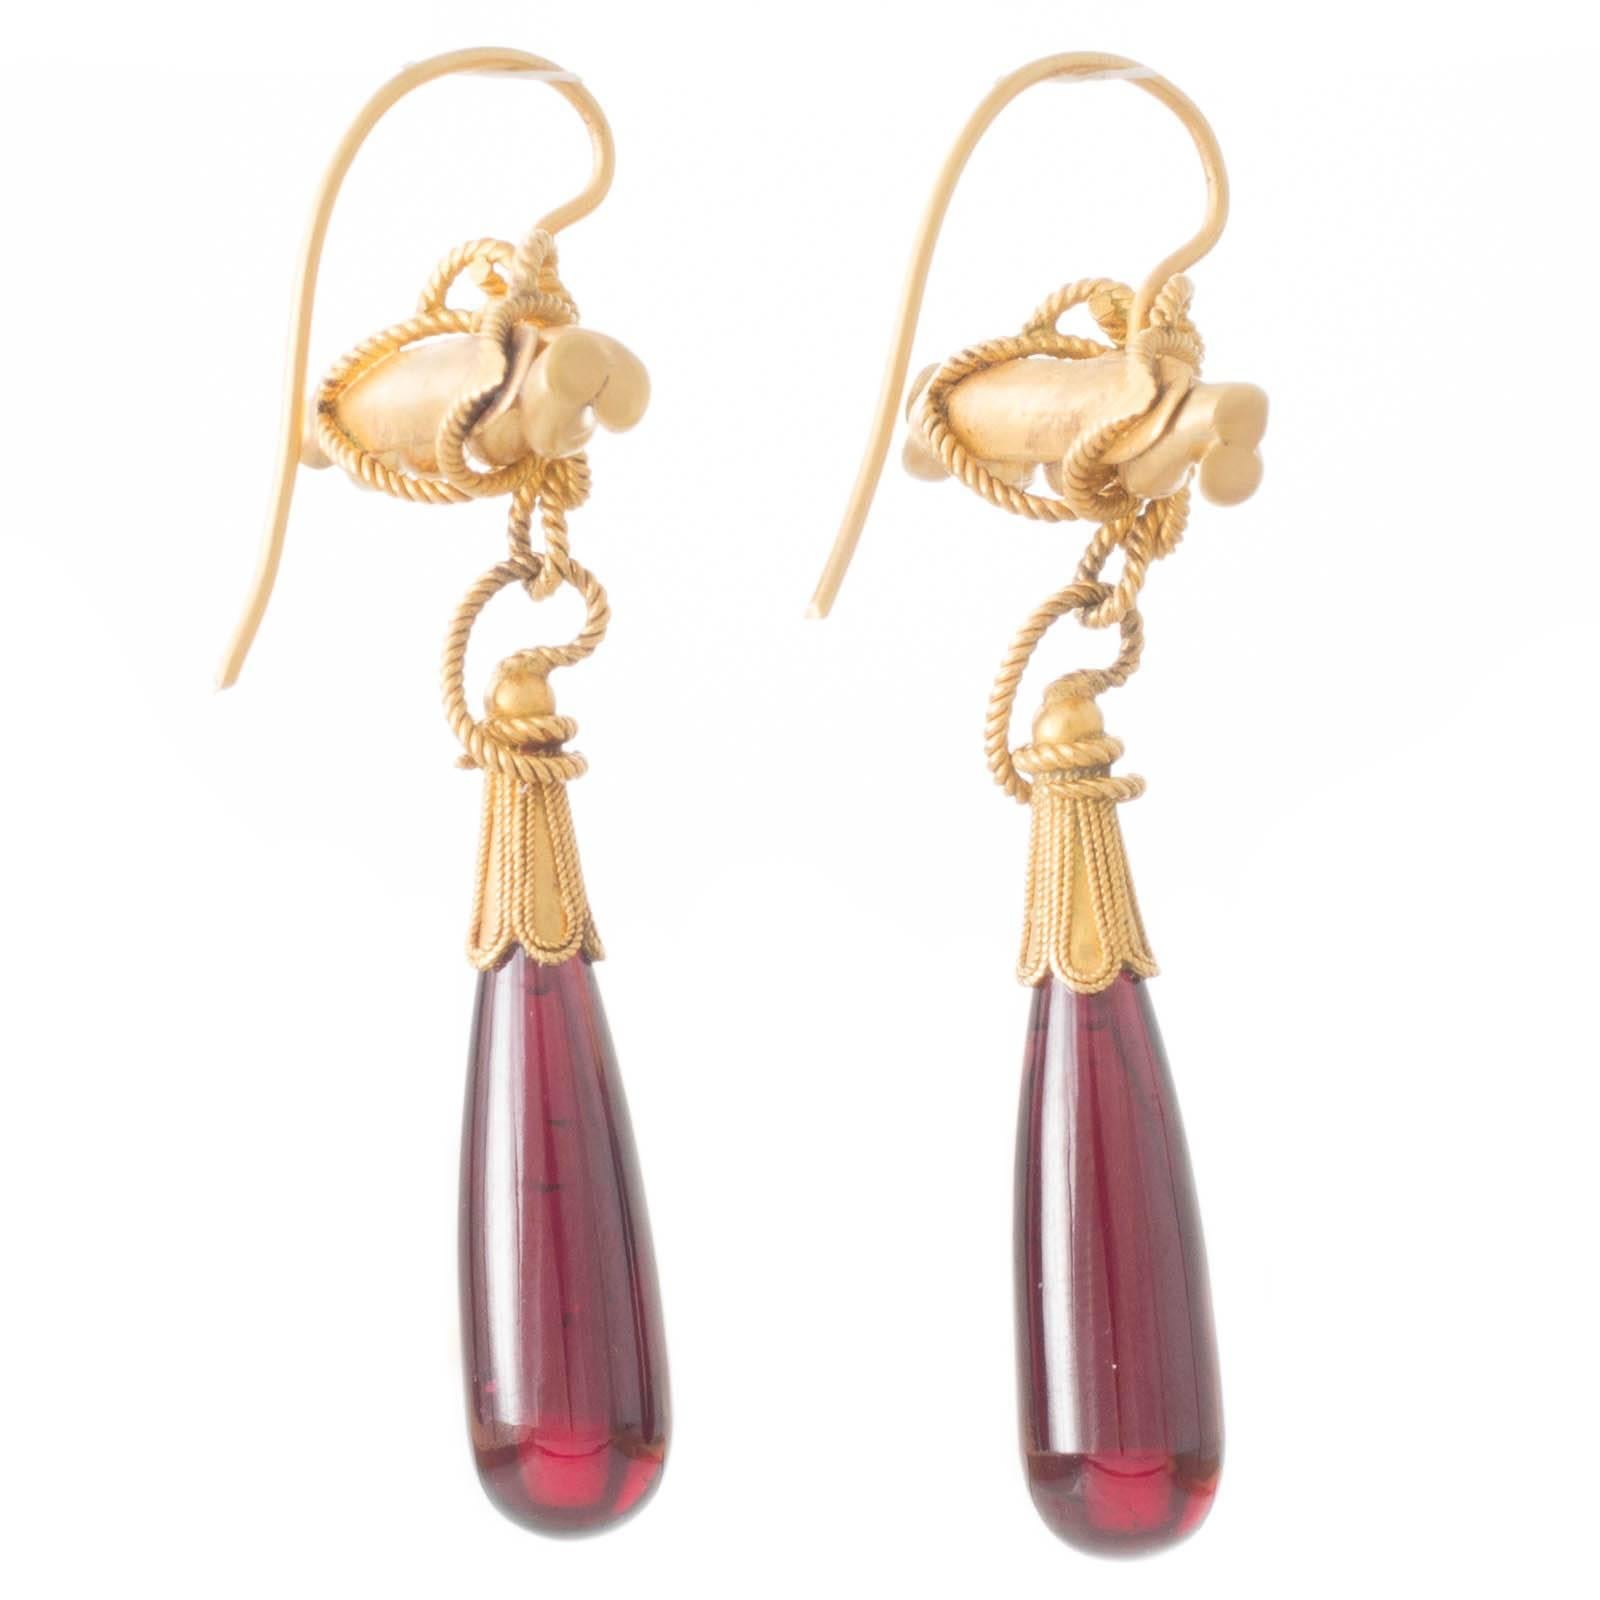 Antique Victorian Gold Drop Earrings with Ropework and Garnets In Excellent Condition For Sale In Melbourne, AU